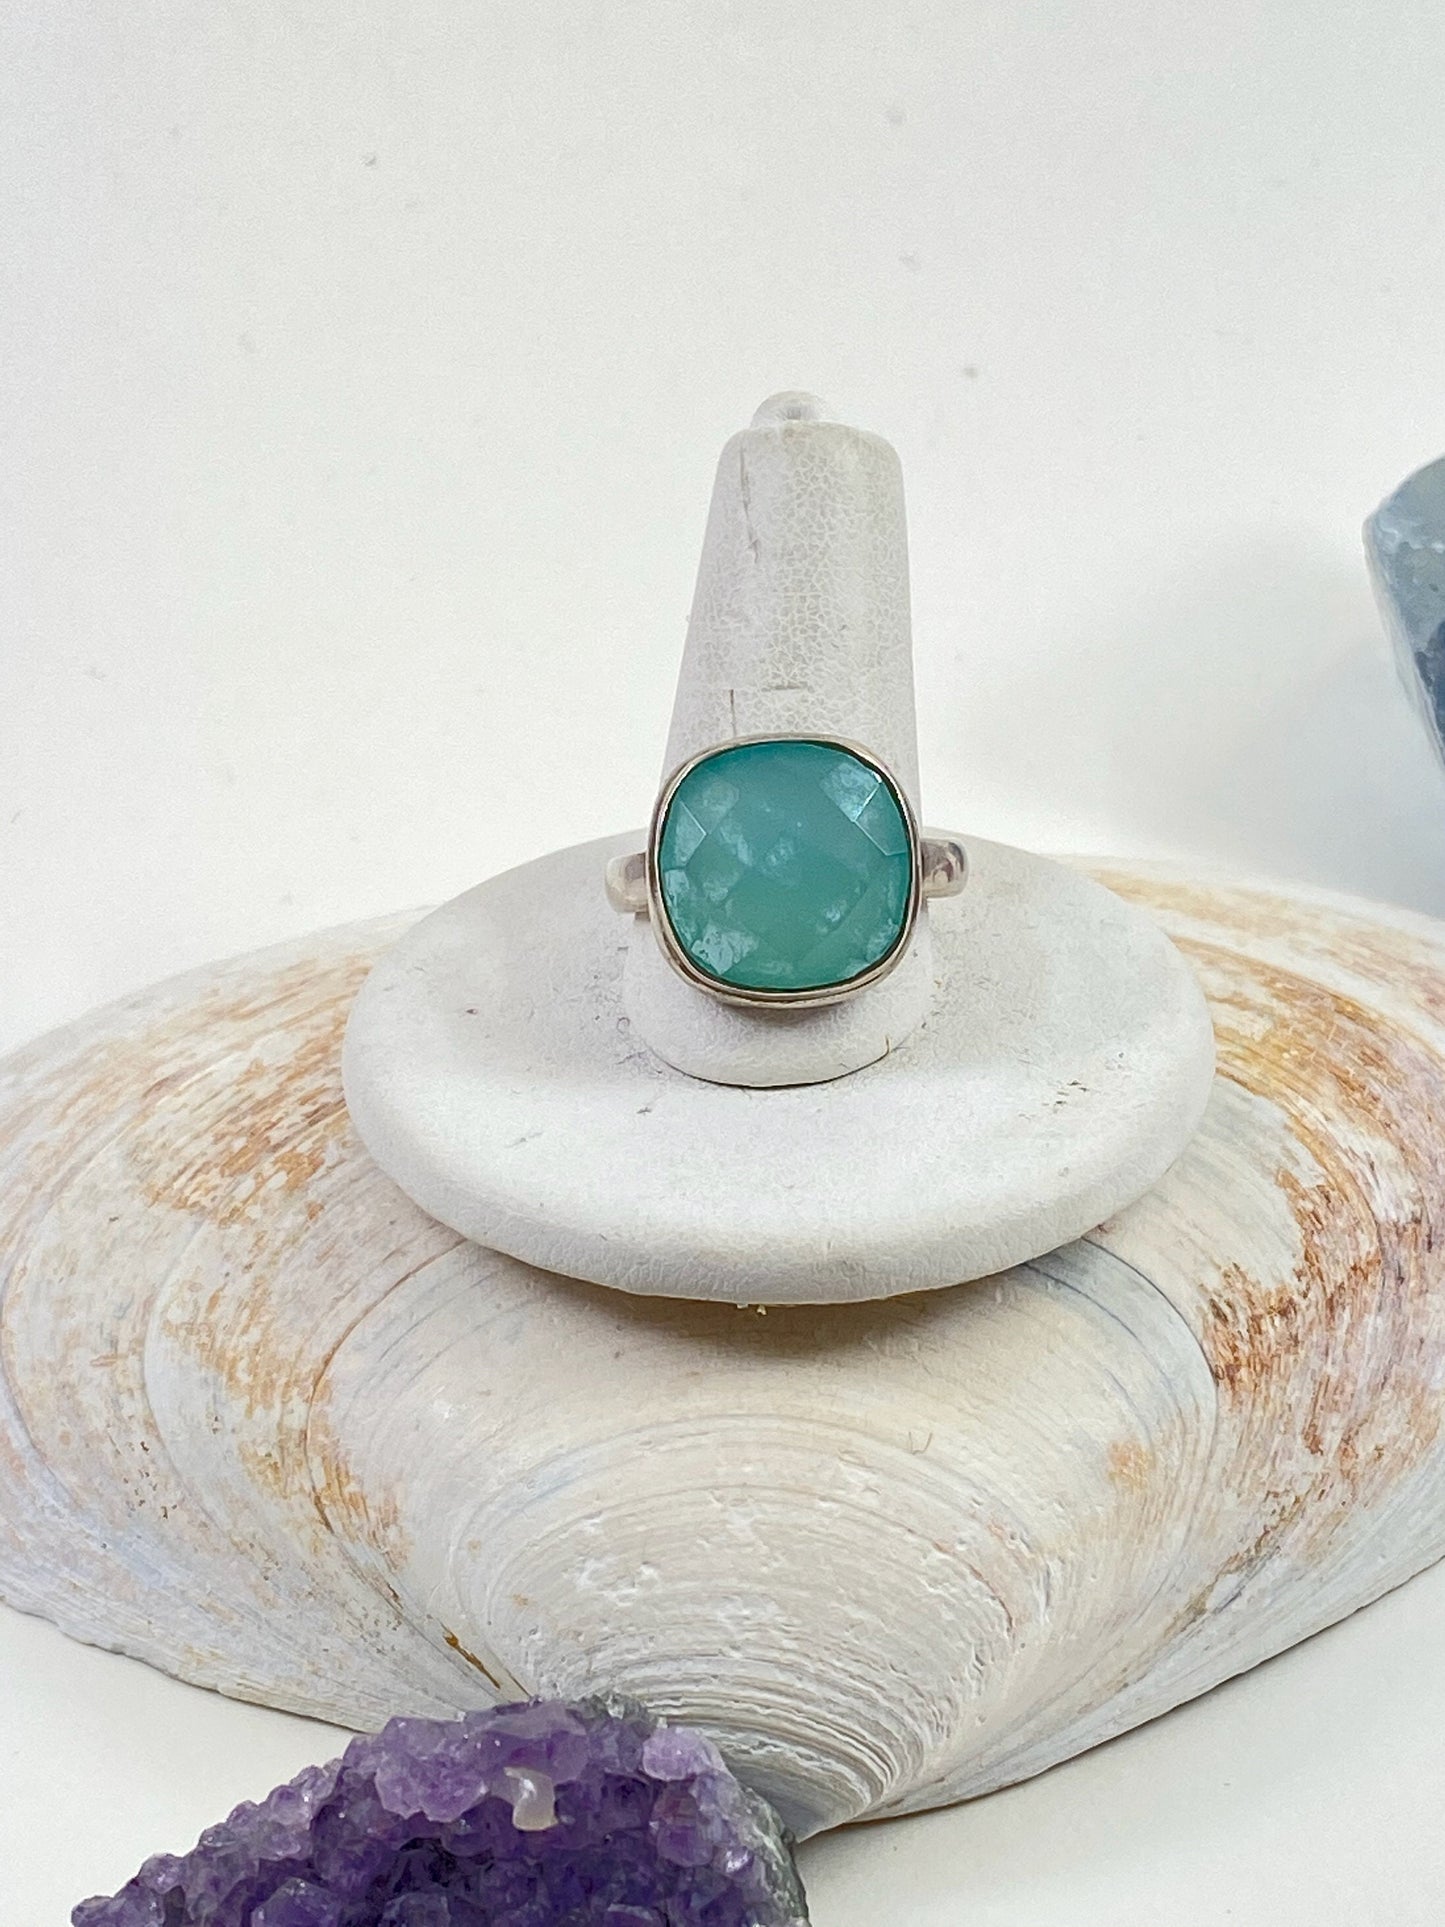 Gorgeous handmade Chalcedony stone sterling silver ring. This beautiful square cut stone is a size 8 1/4 stunning ring.